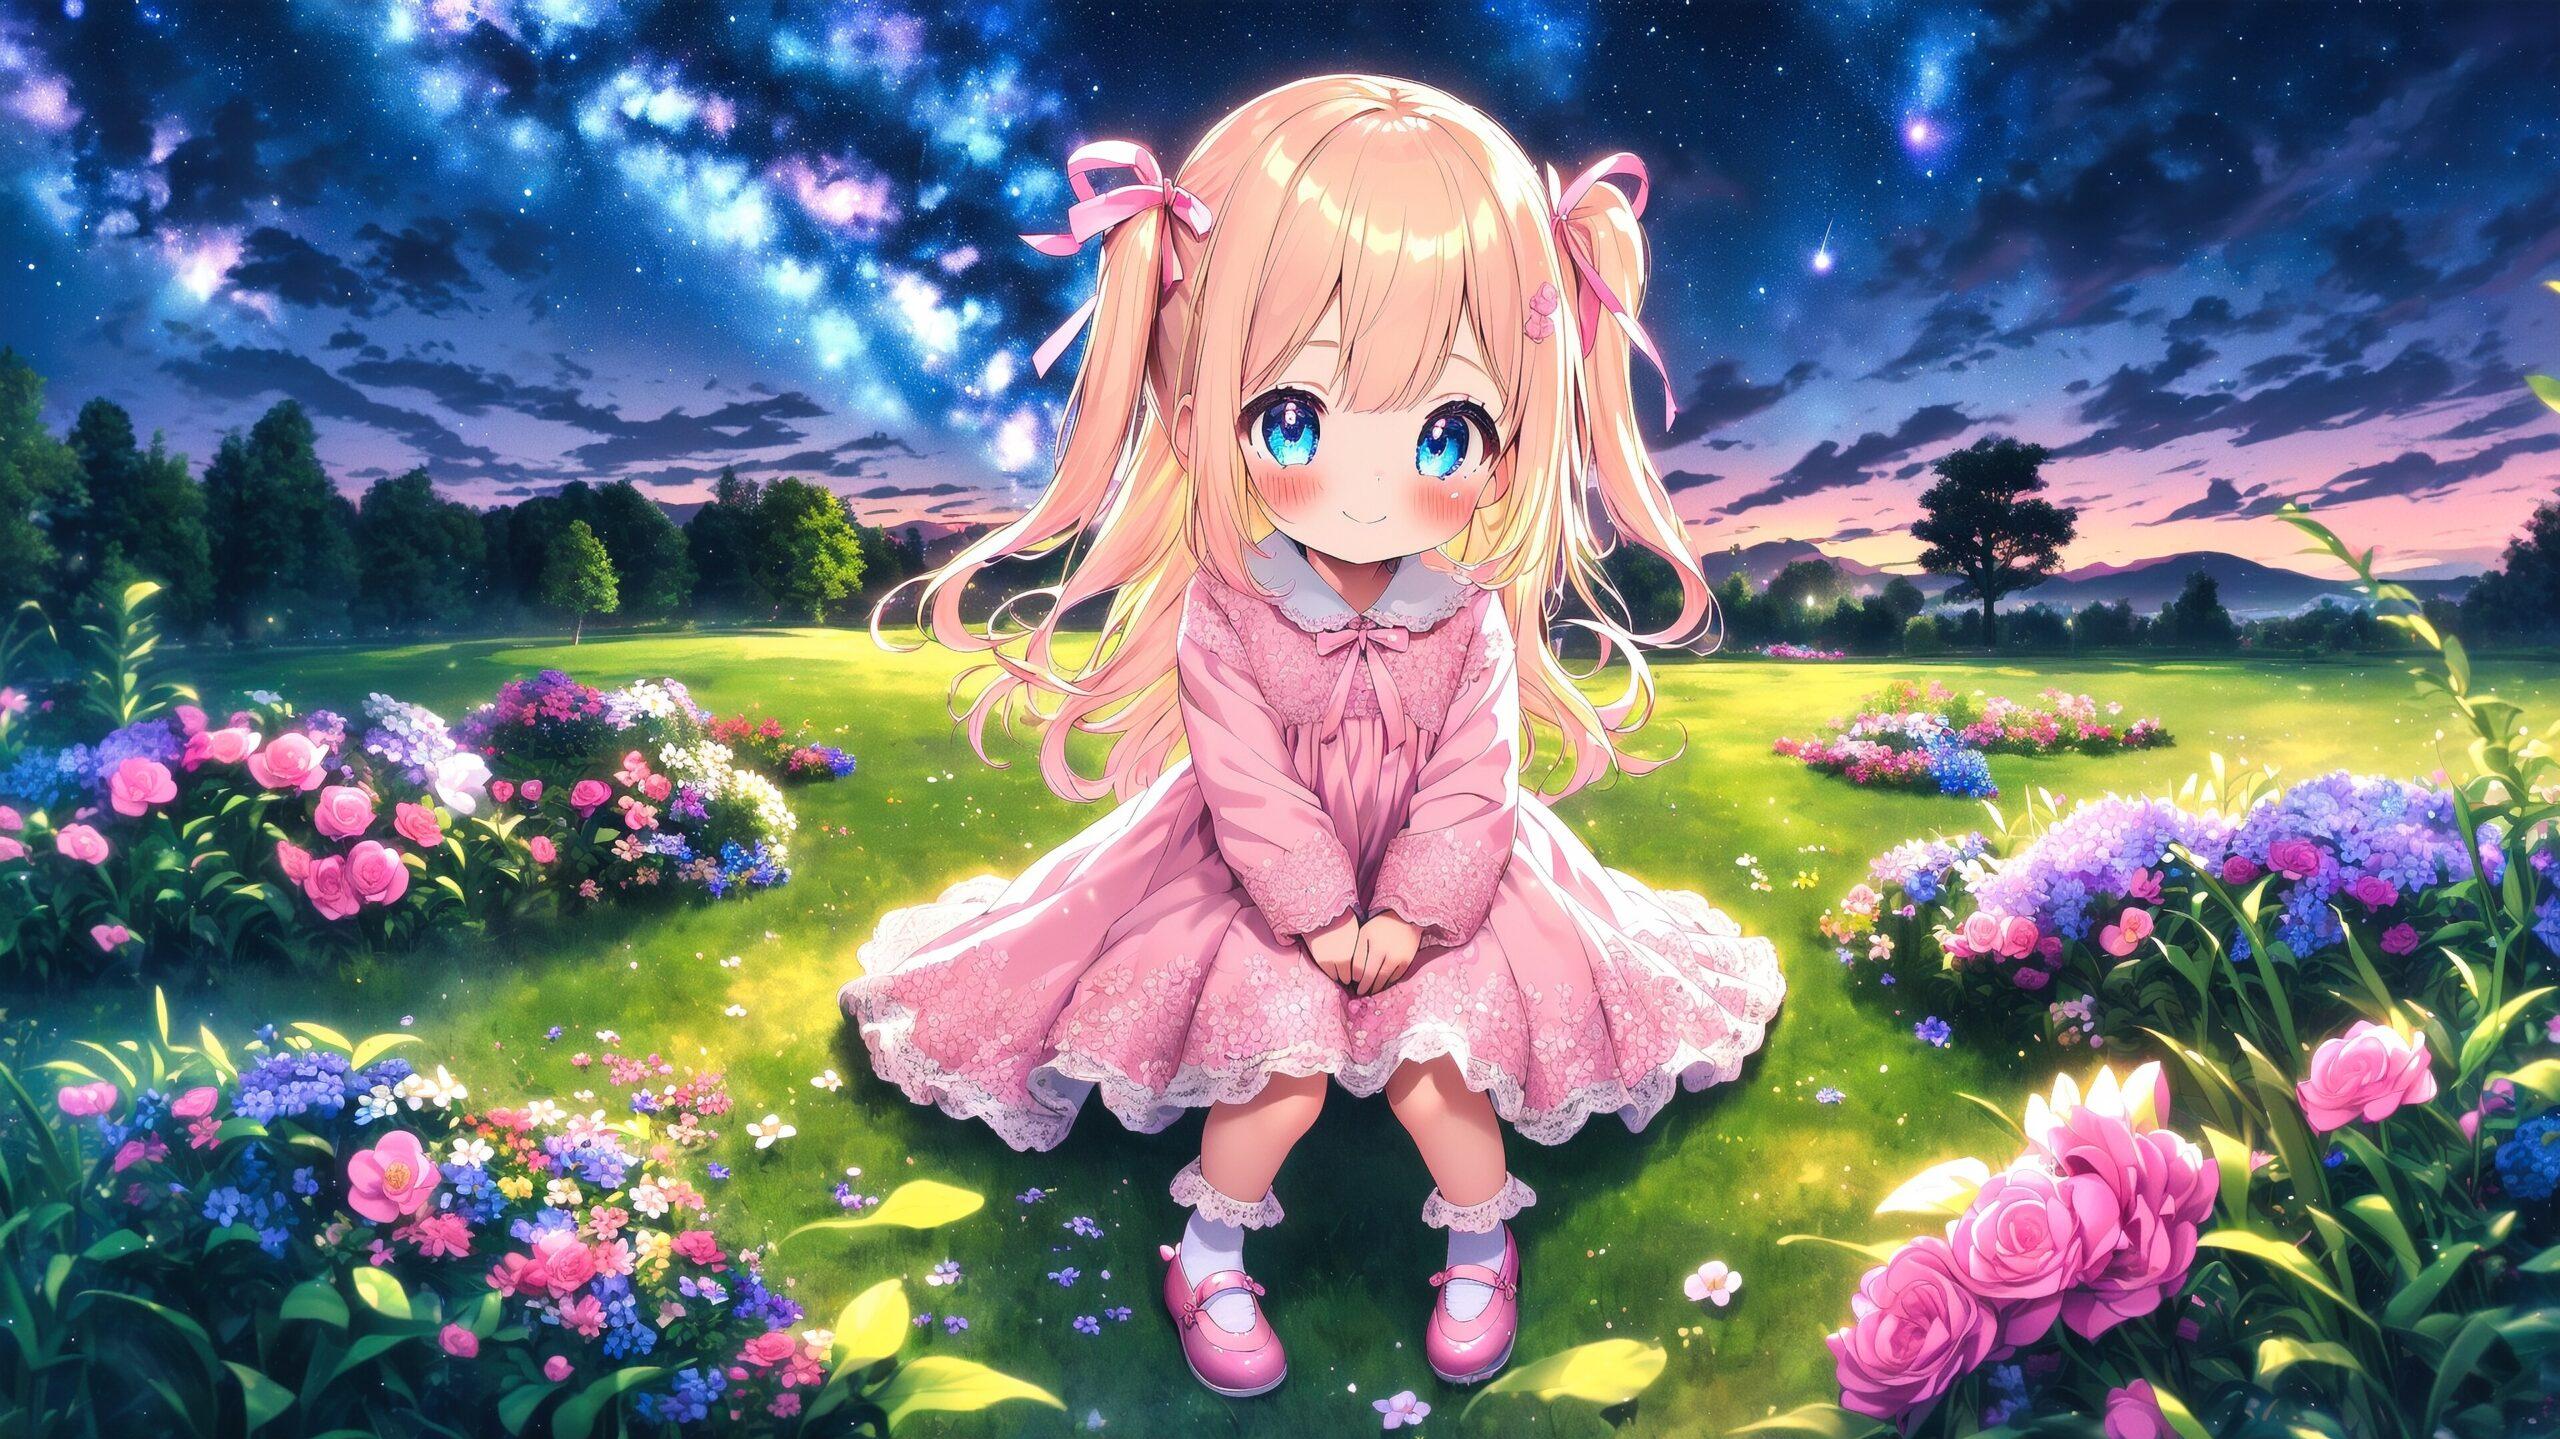 4K Wallpapers Blonde girl in a dress under the night sky zzzs